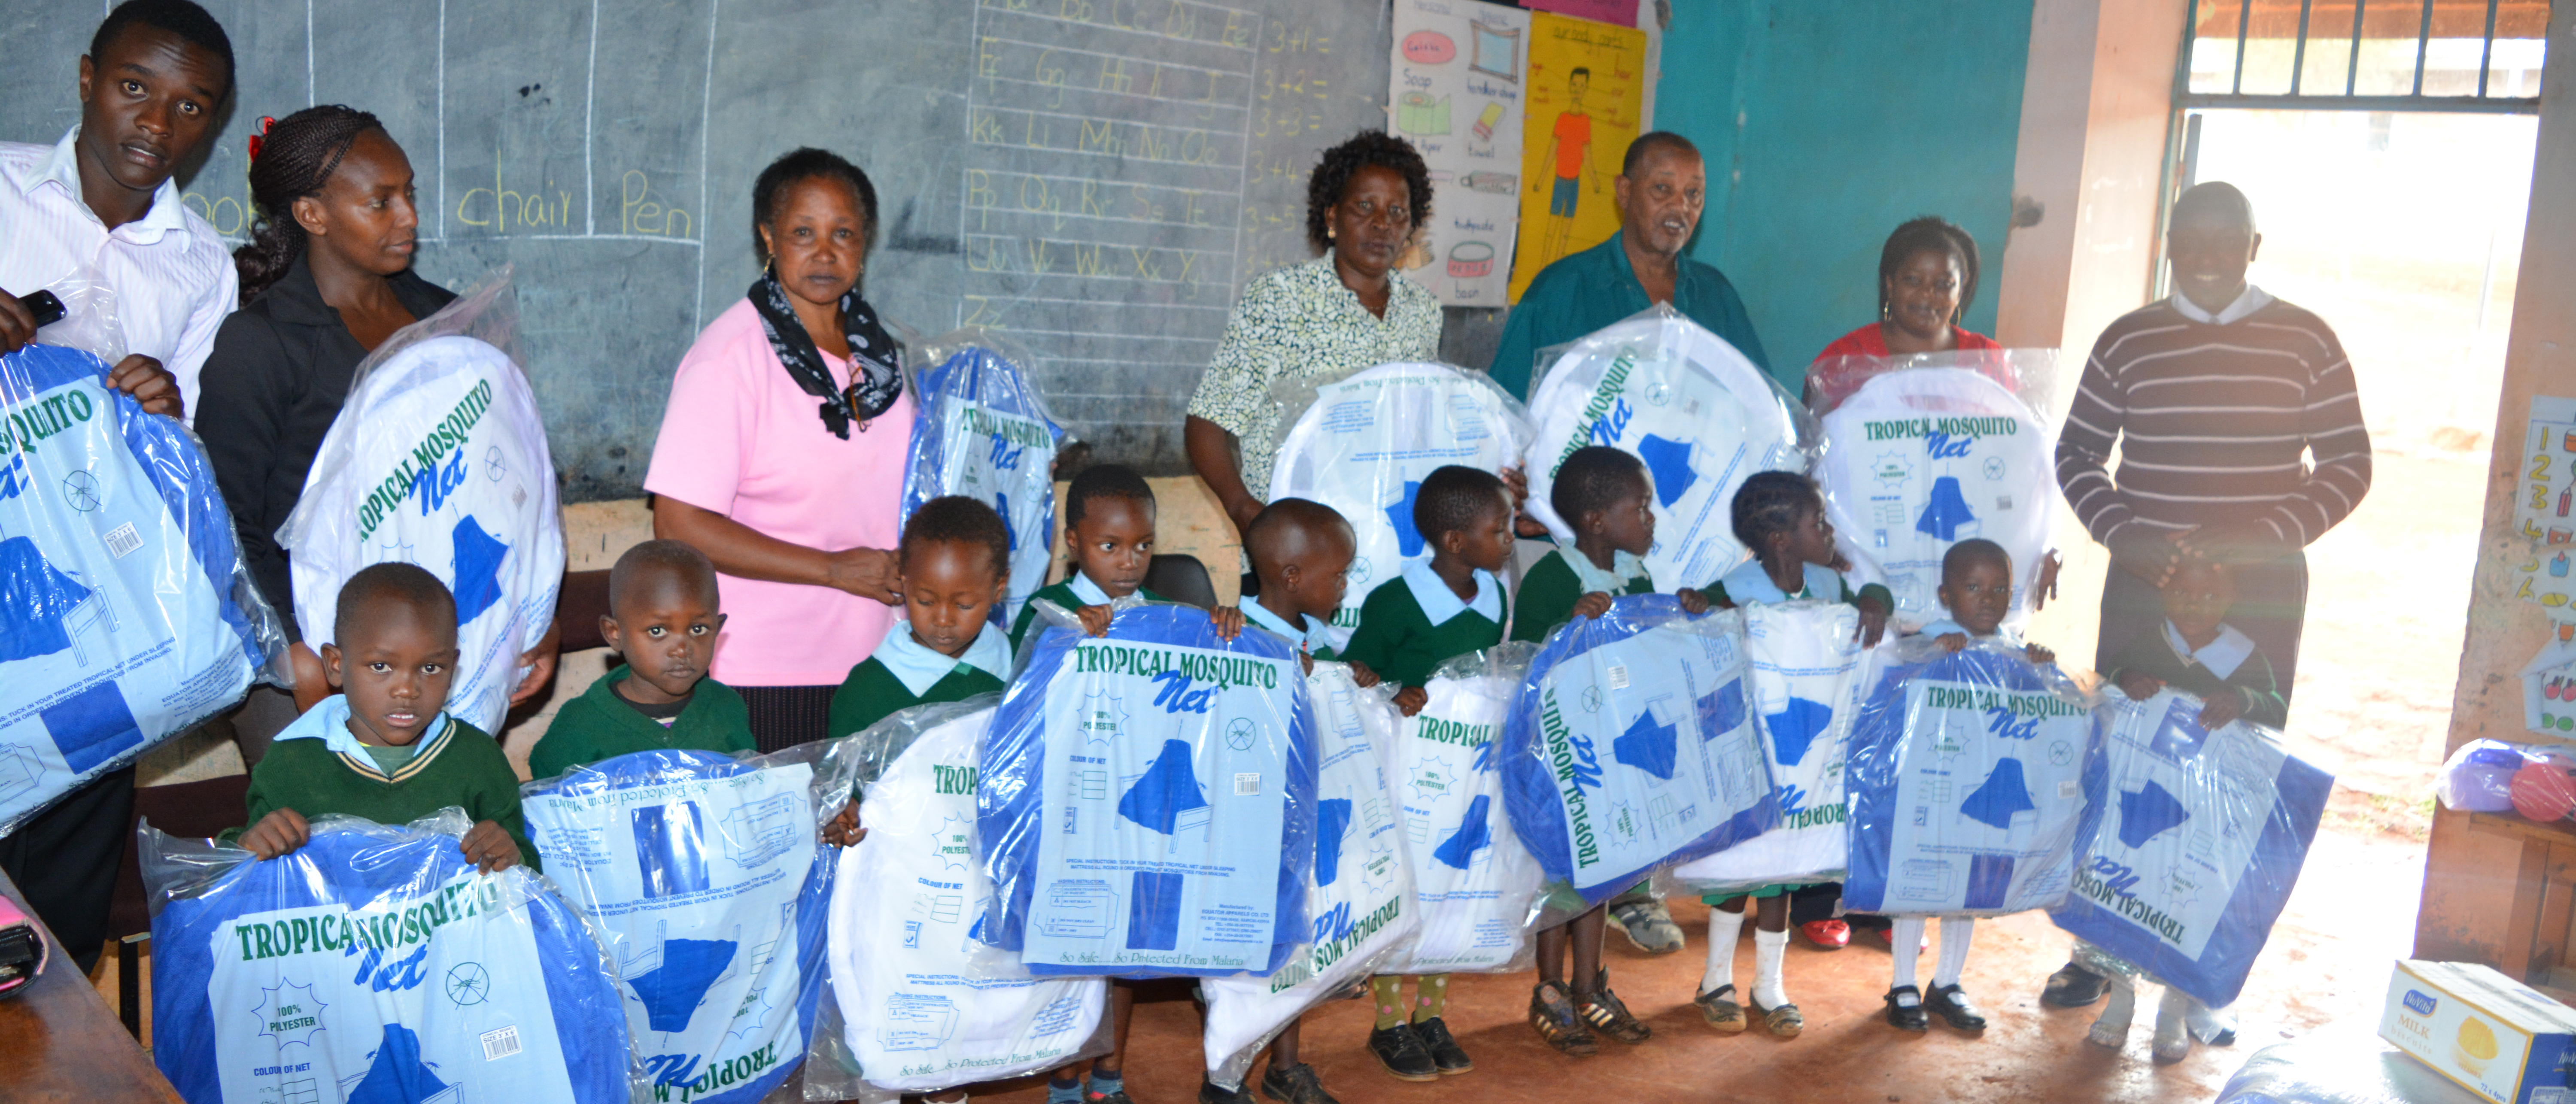 Children at the BION clinic in Kenya receiving their insecticide-impregnated bed nets as part of the malaria prevention programme.